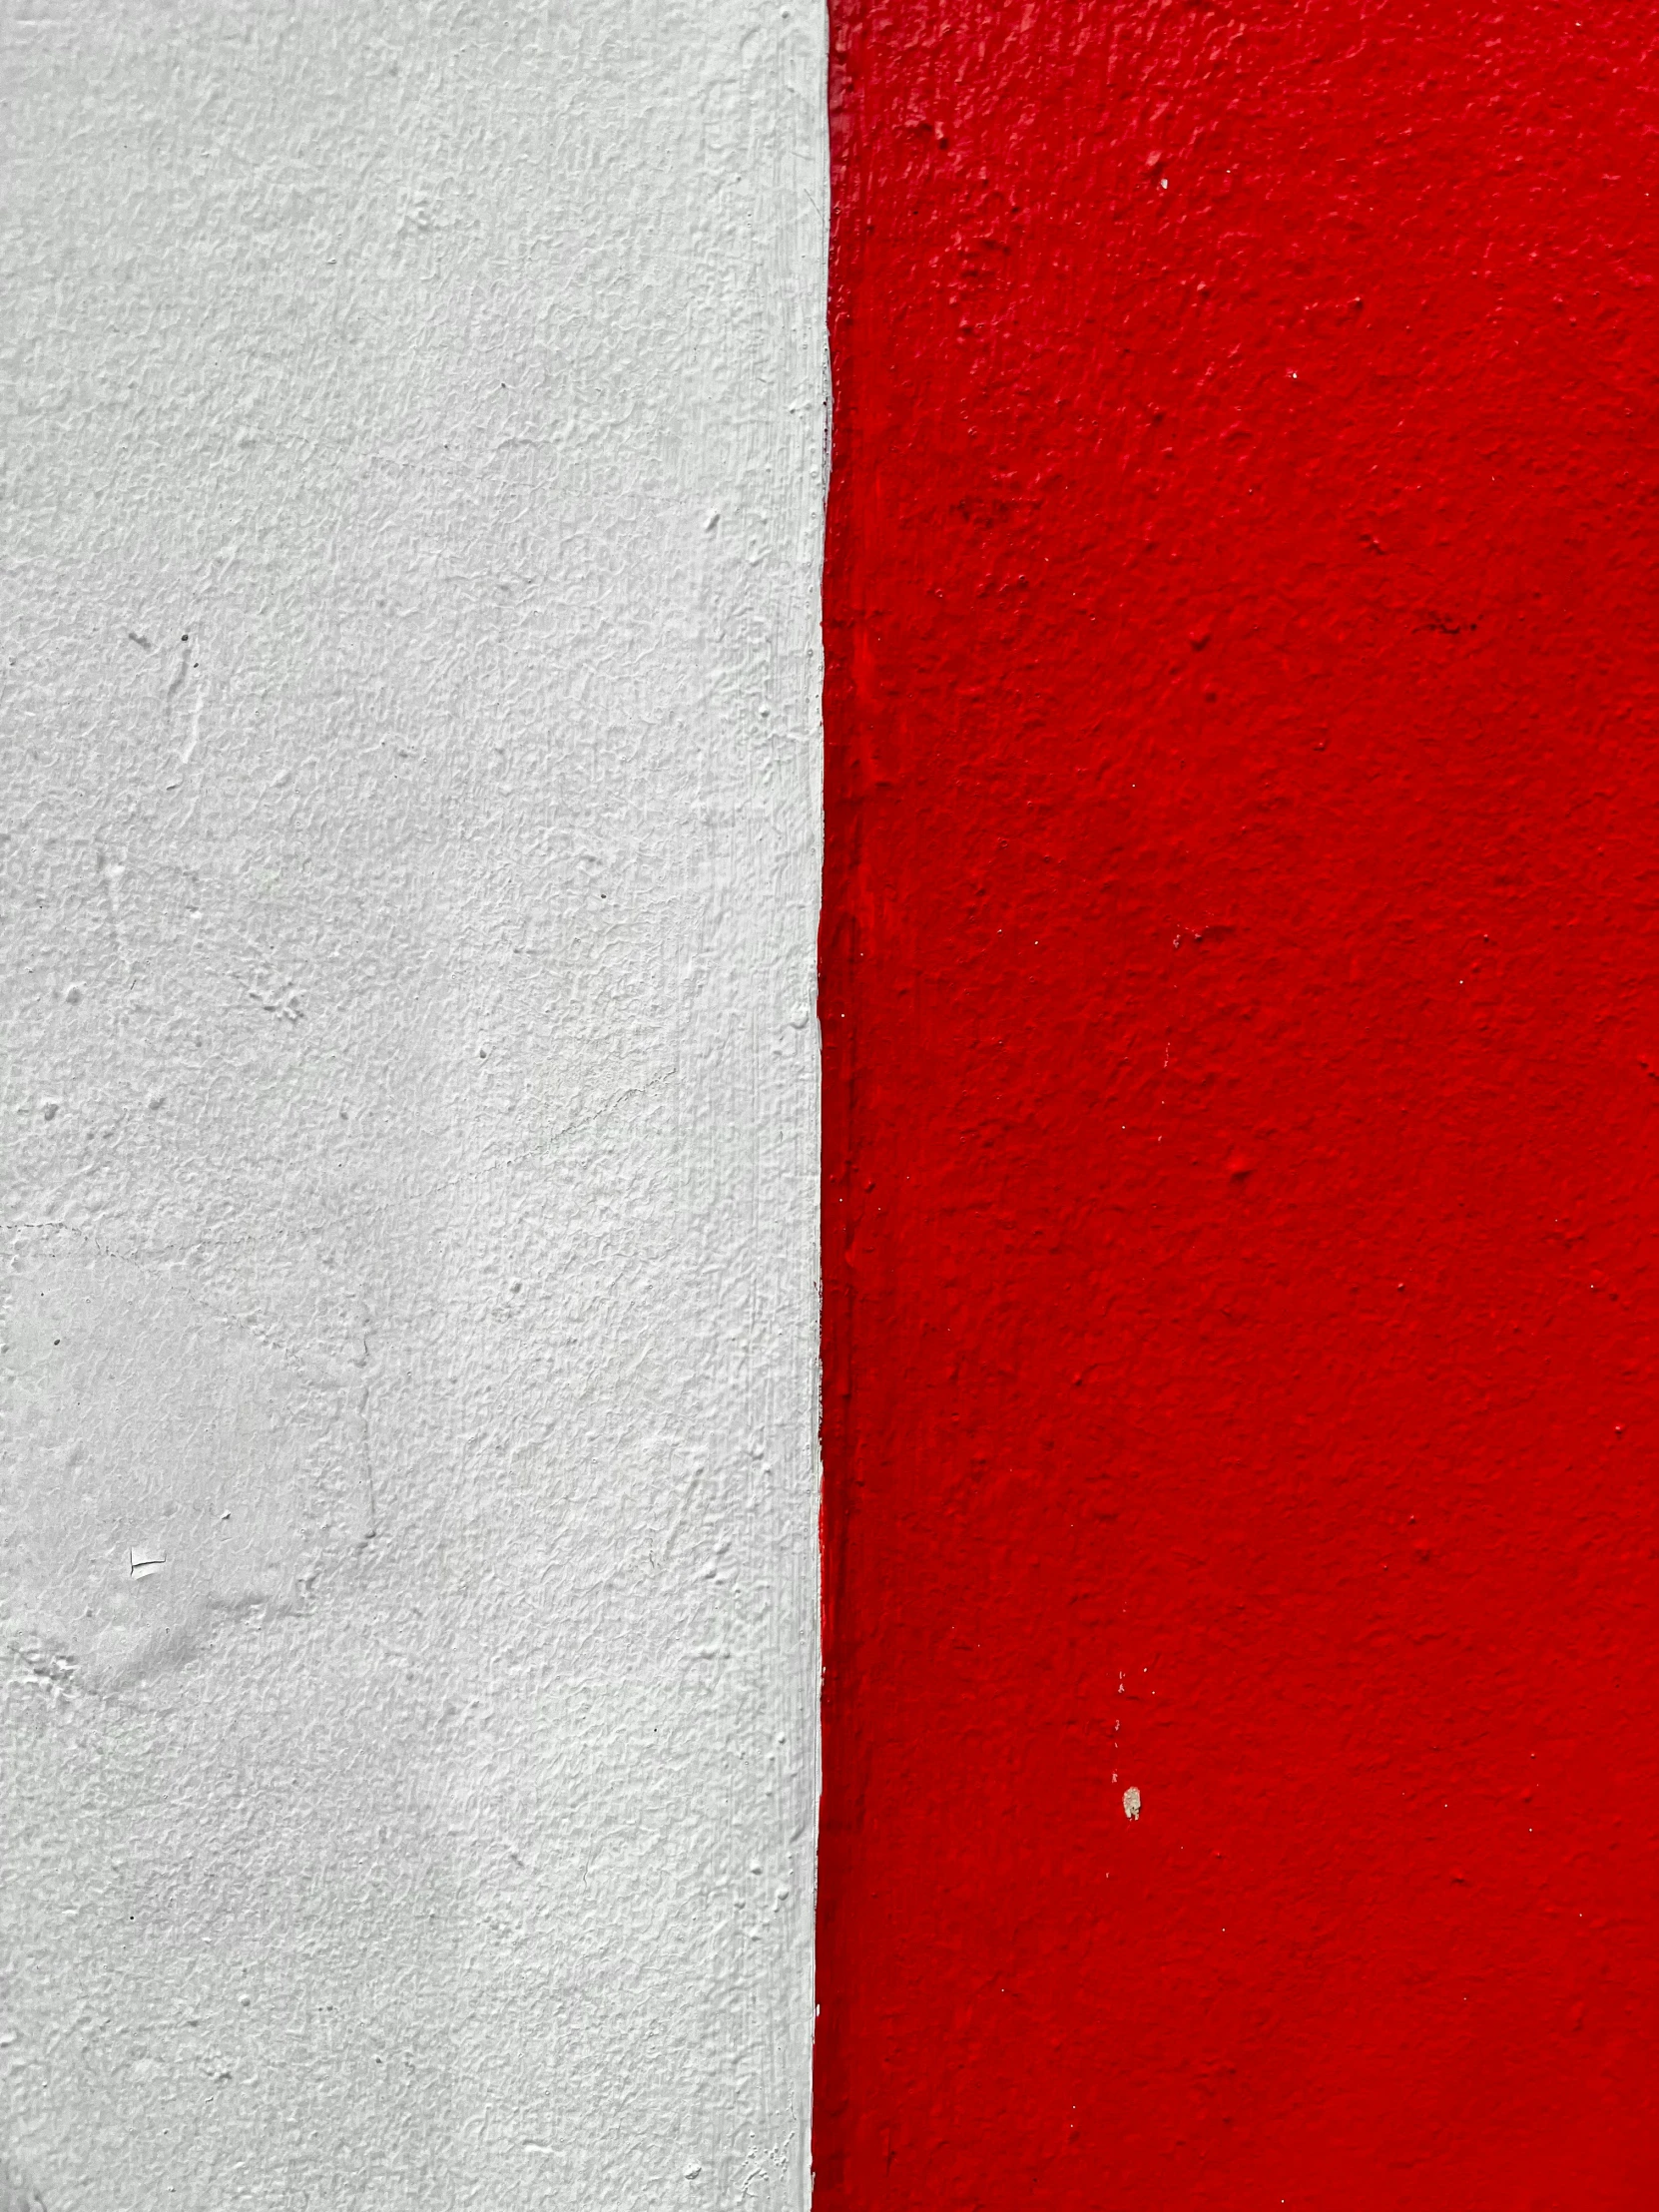 a red and white wall is painted two colors